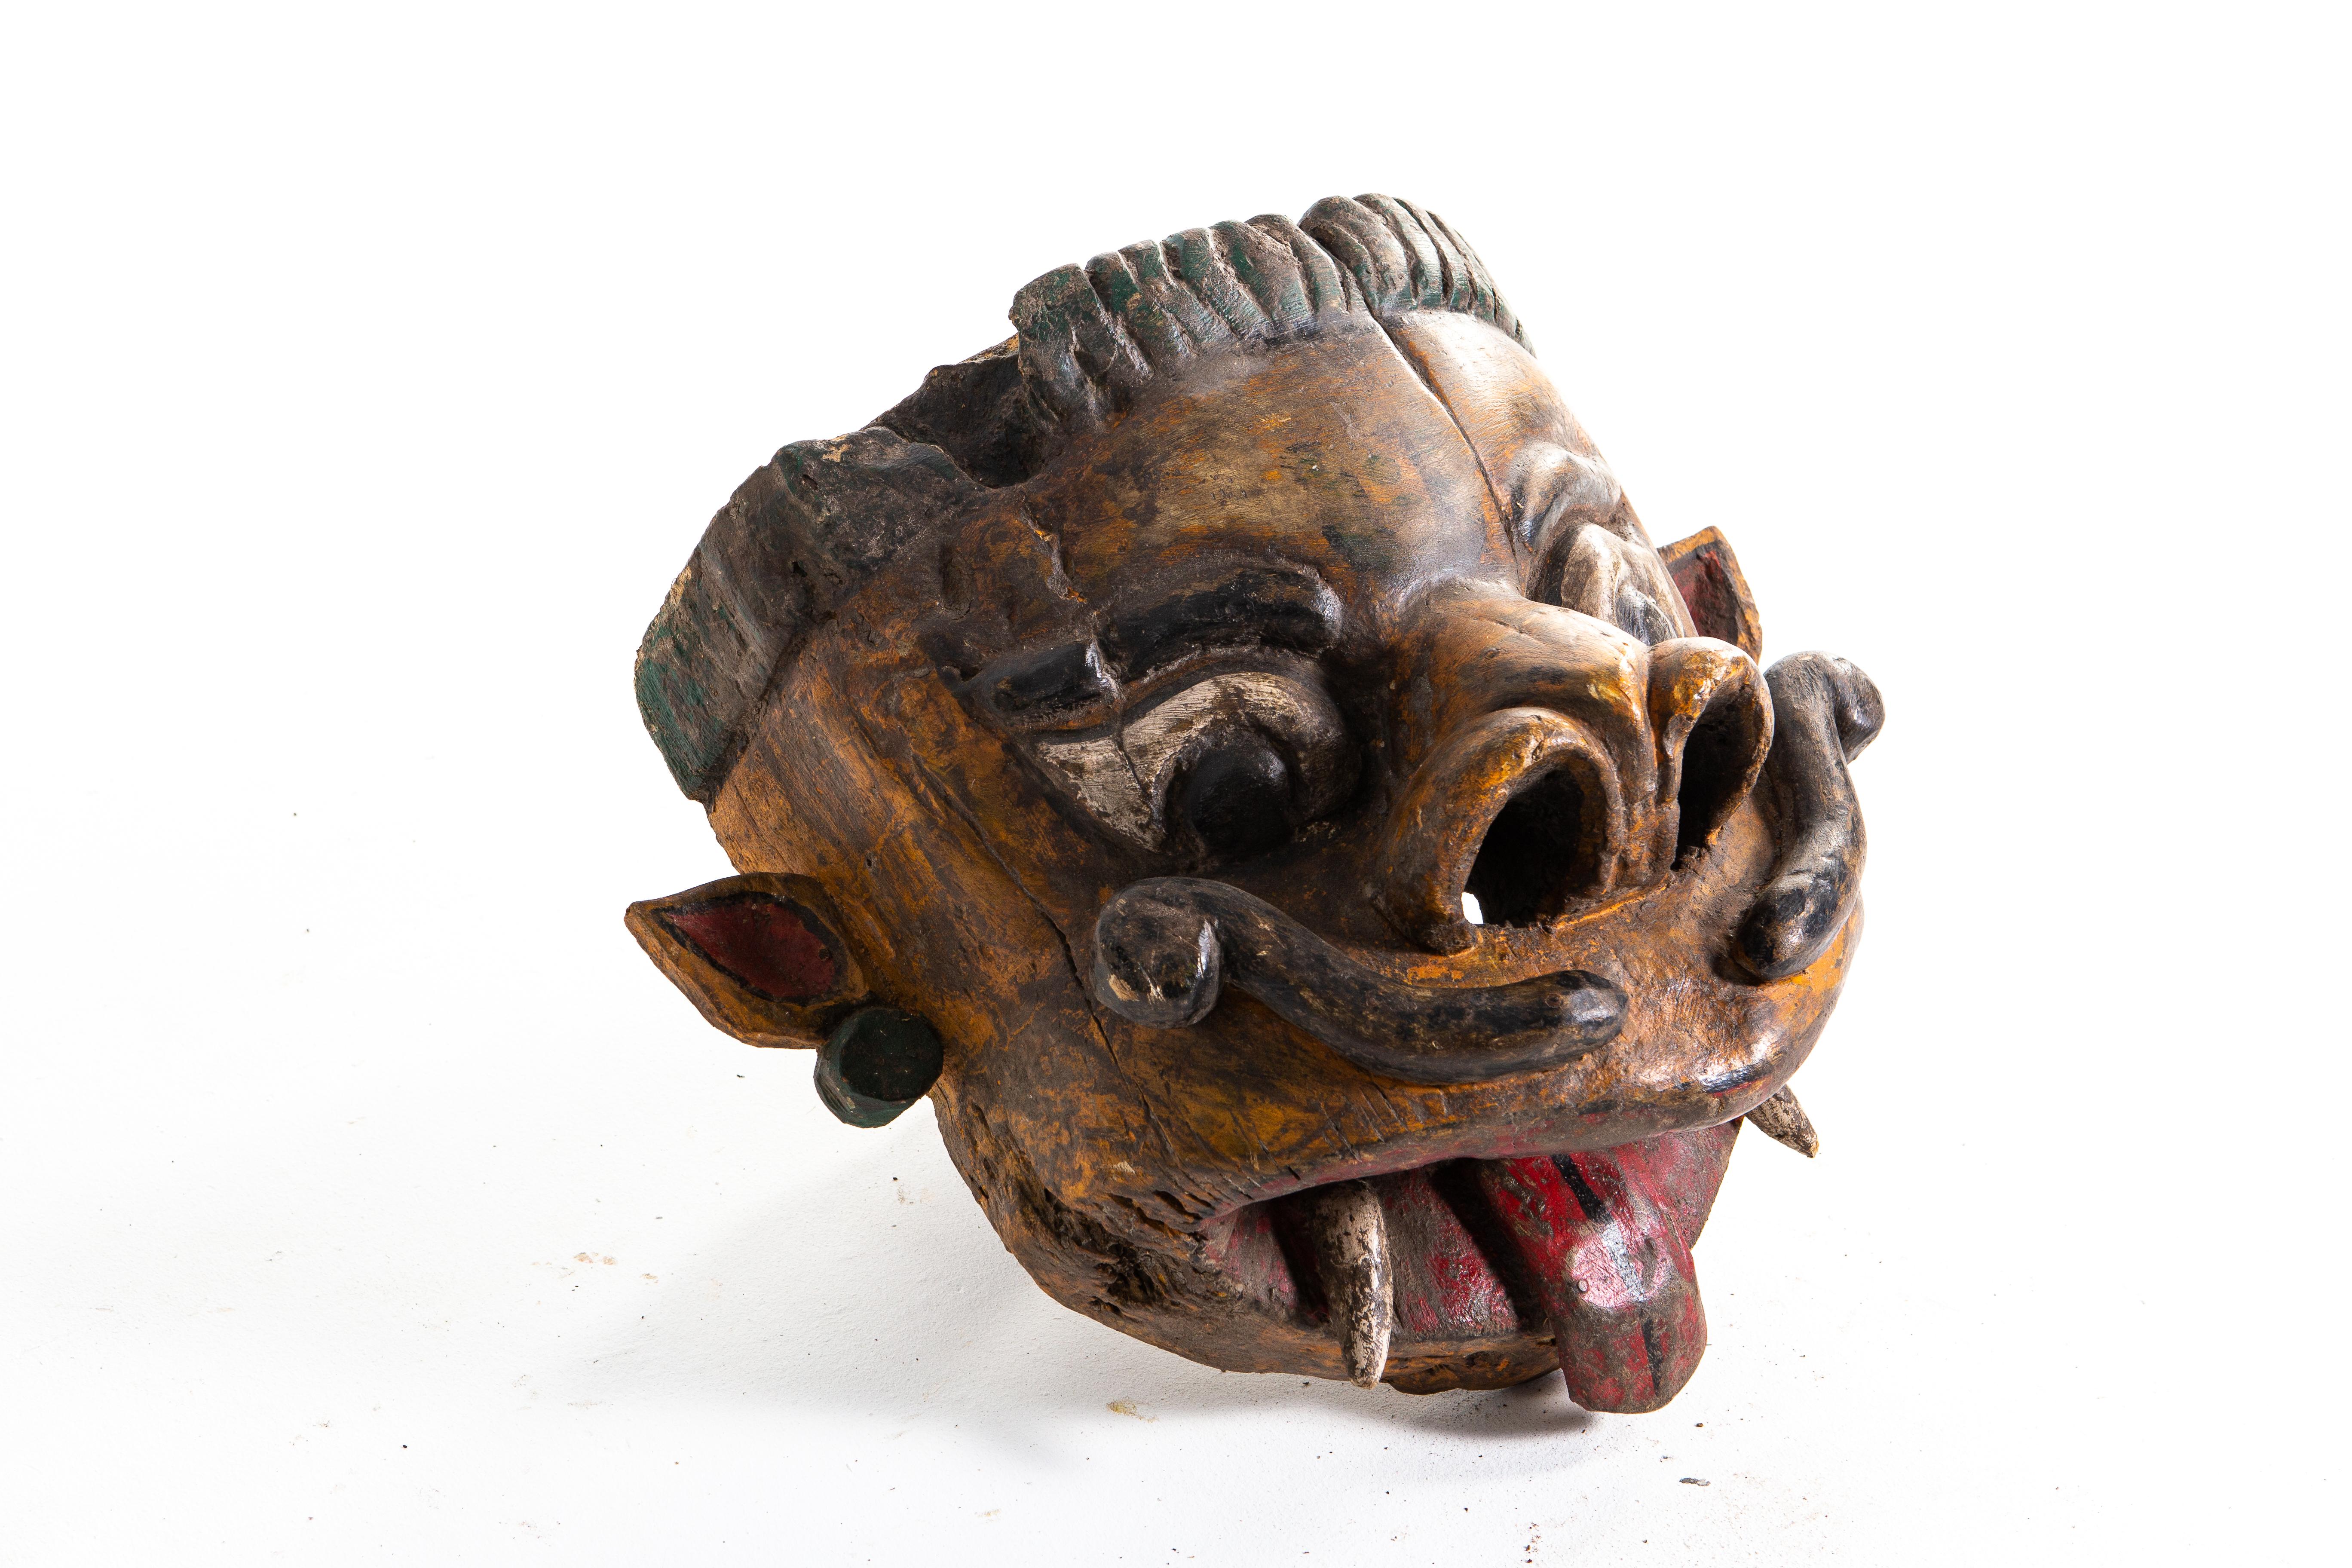 Poly-chrome wooden mask from Rajasthan, India, made from Sheesham wood, circa 20th century. The mask features a grotesque smile that is designed to ward off the evil eye. According to traditional beliefs, a beautiful mask would only lure envy and